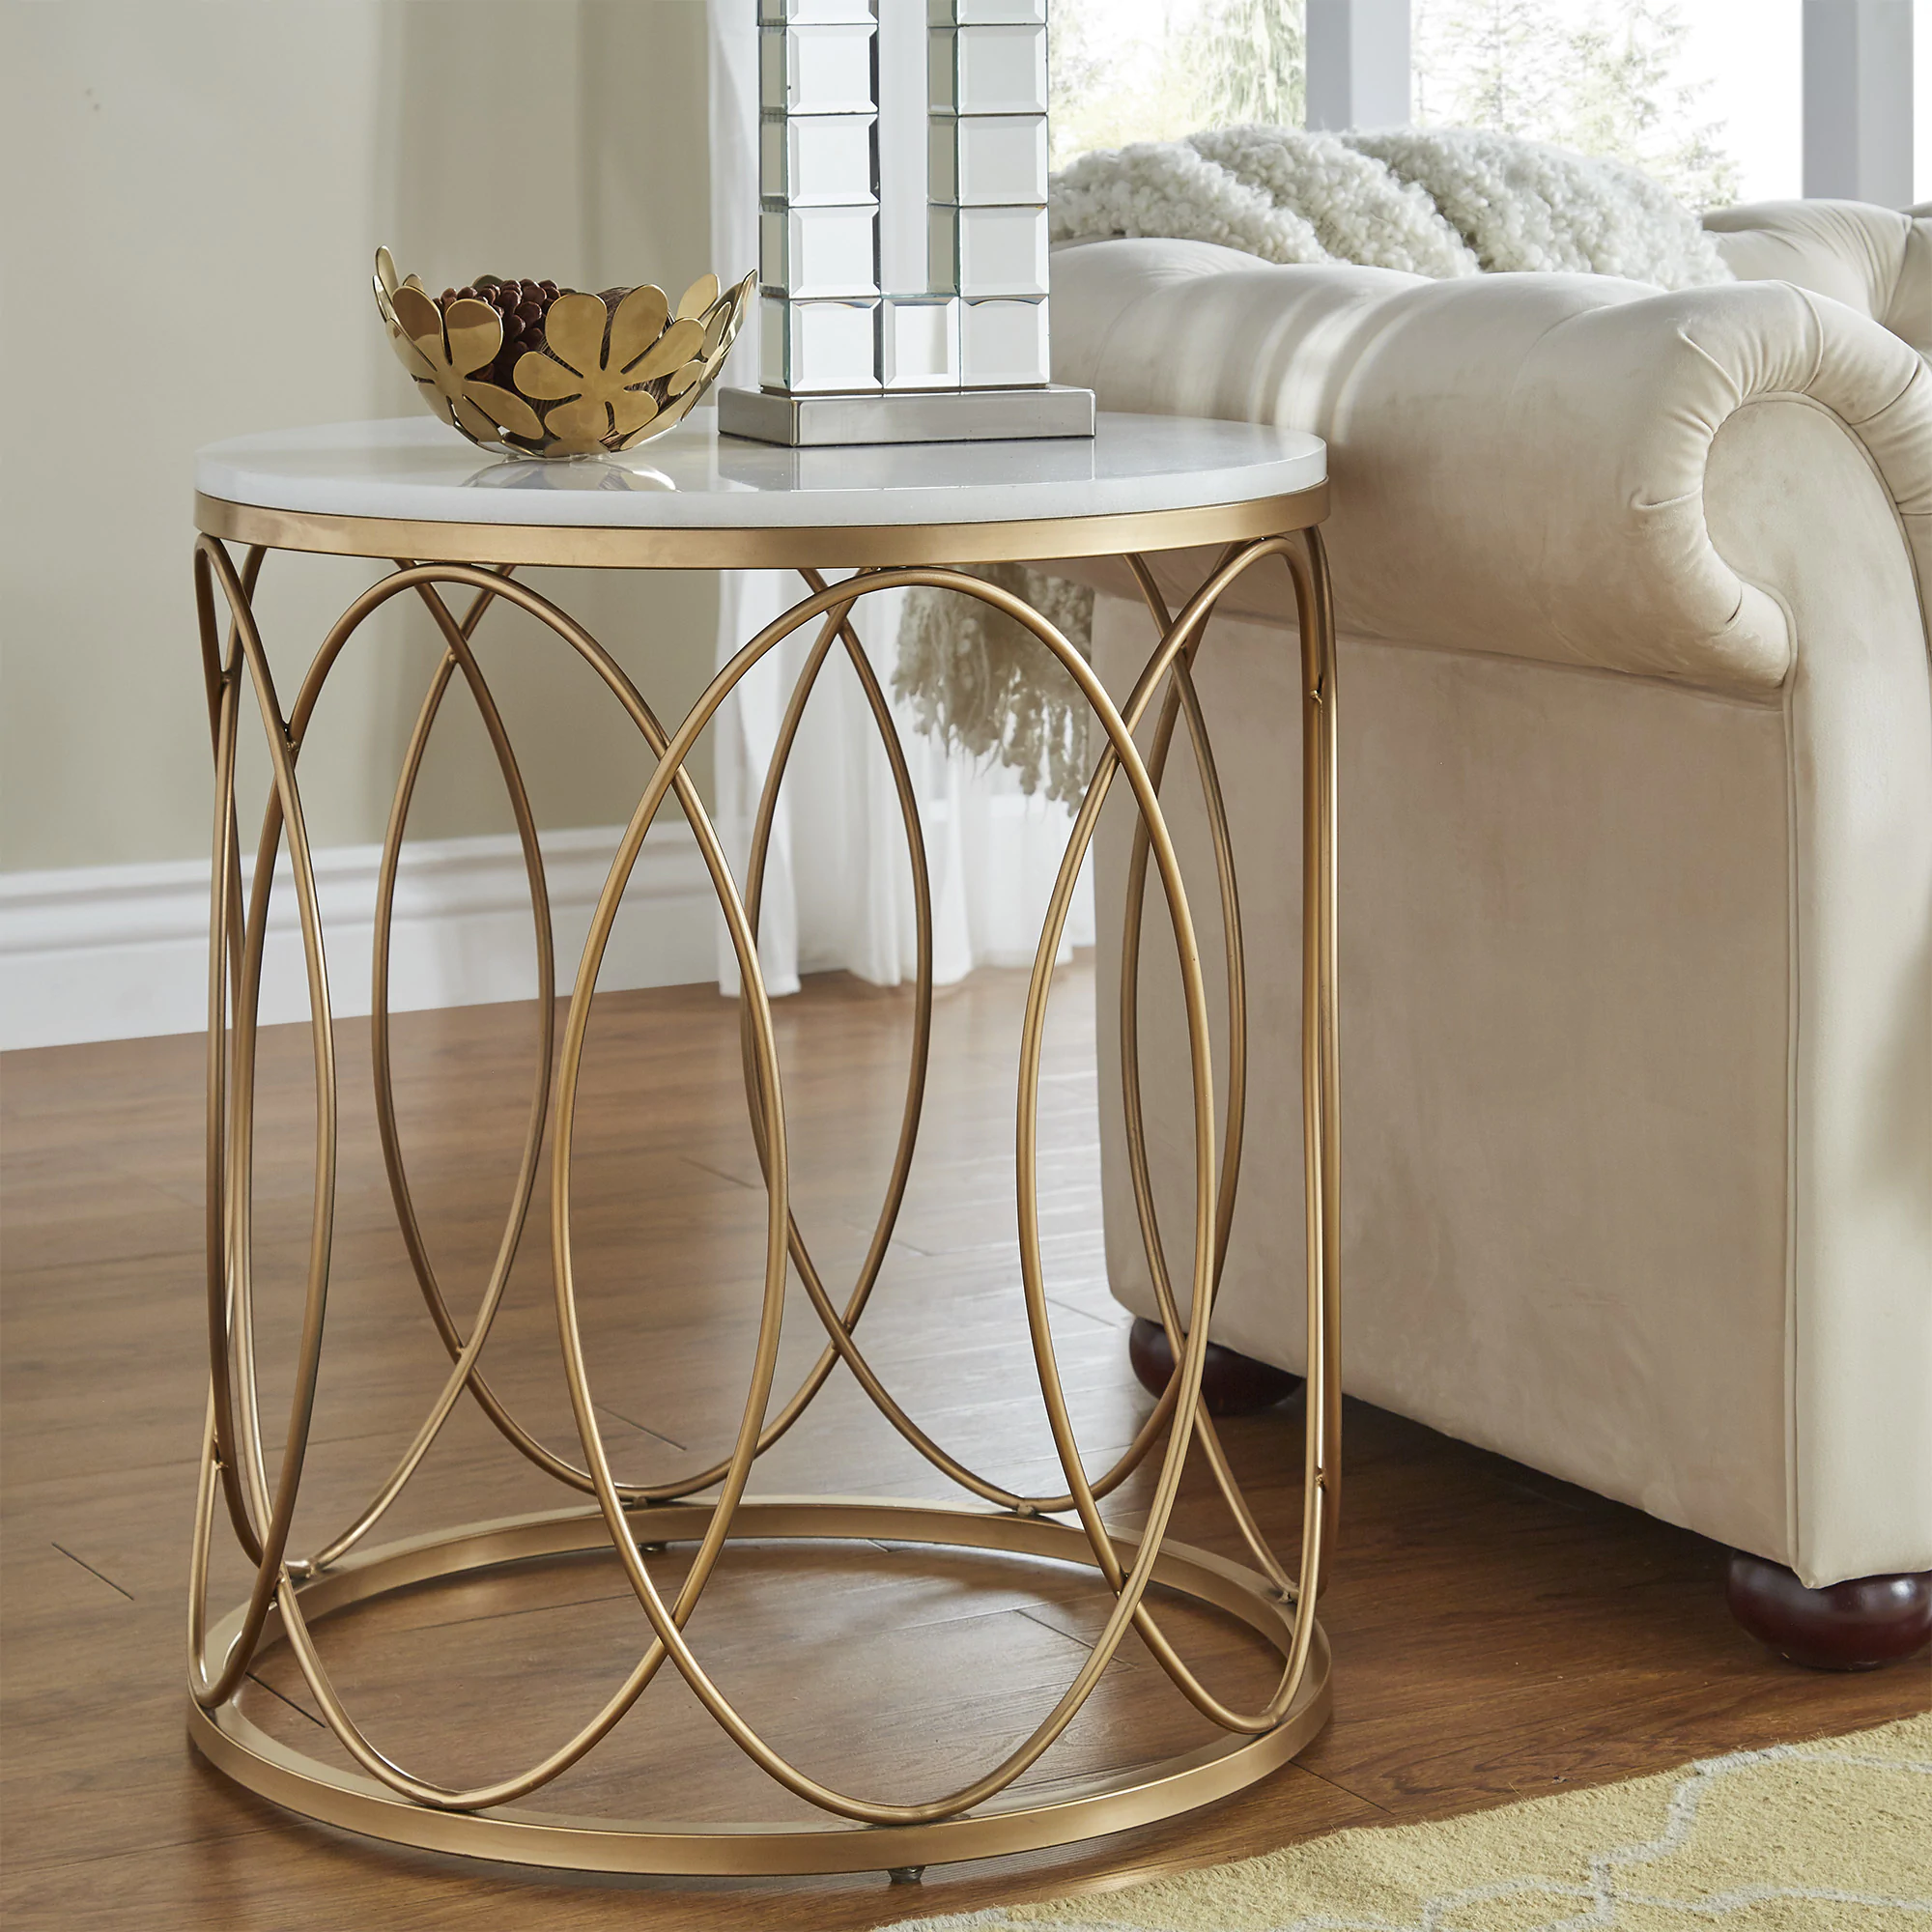 lynn round gold end table with marble top inspire bold small accent free shipping today glass nesting tables bedroom decor ideas chandelier bedside lamp lack desk concrete dining